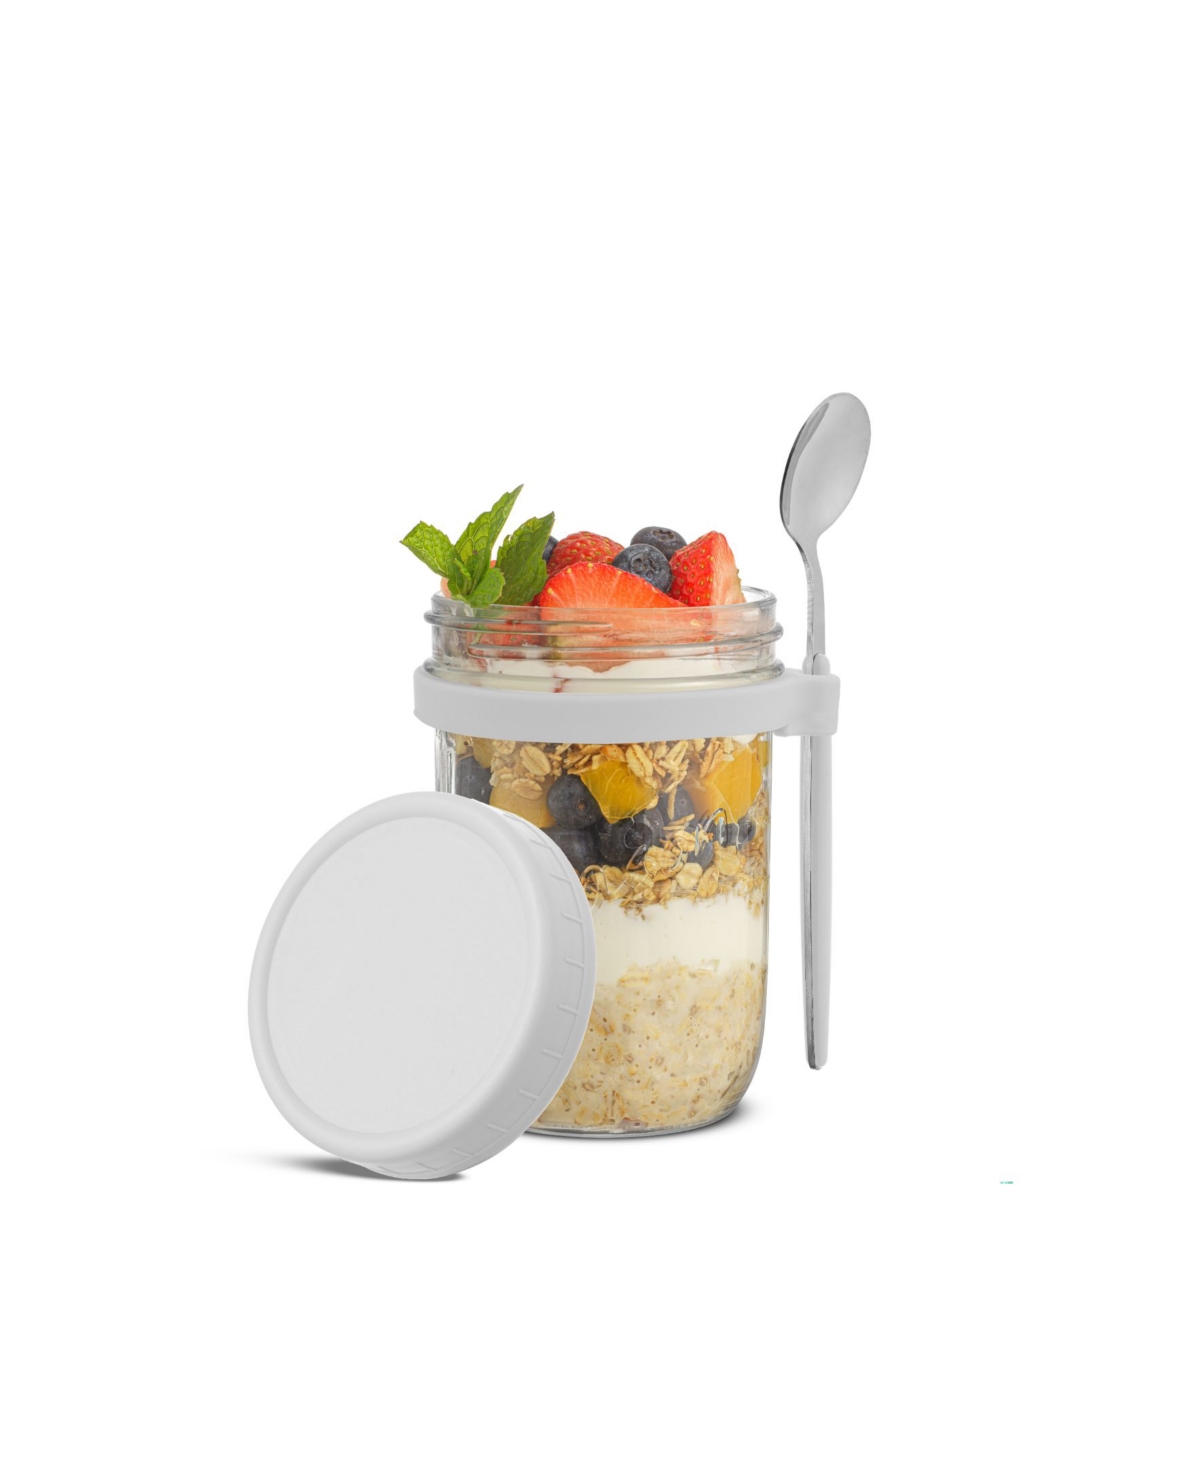 Dawn Overnight Oats Glass Containers, 16 Oz, Set of 3 - White